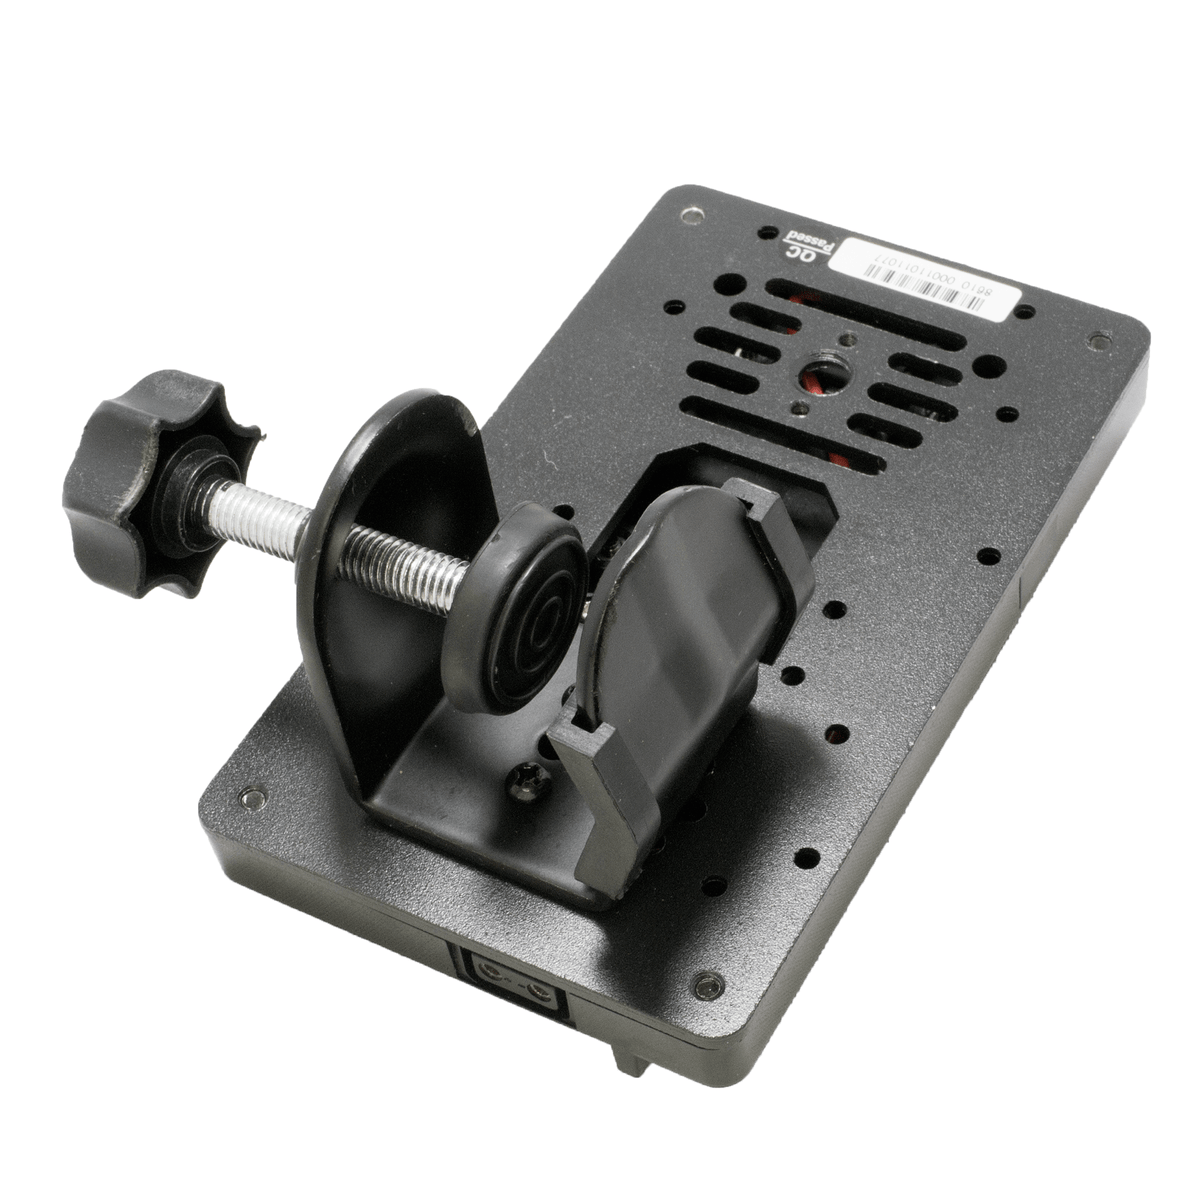 CINEGEARS V-Mount Battery Plate with Universal Clamp